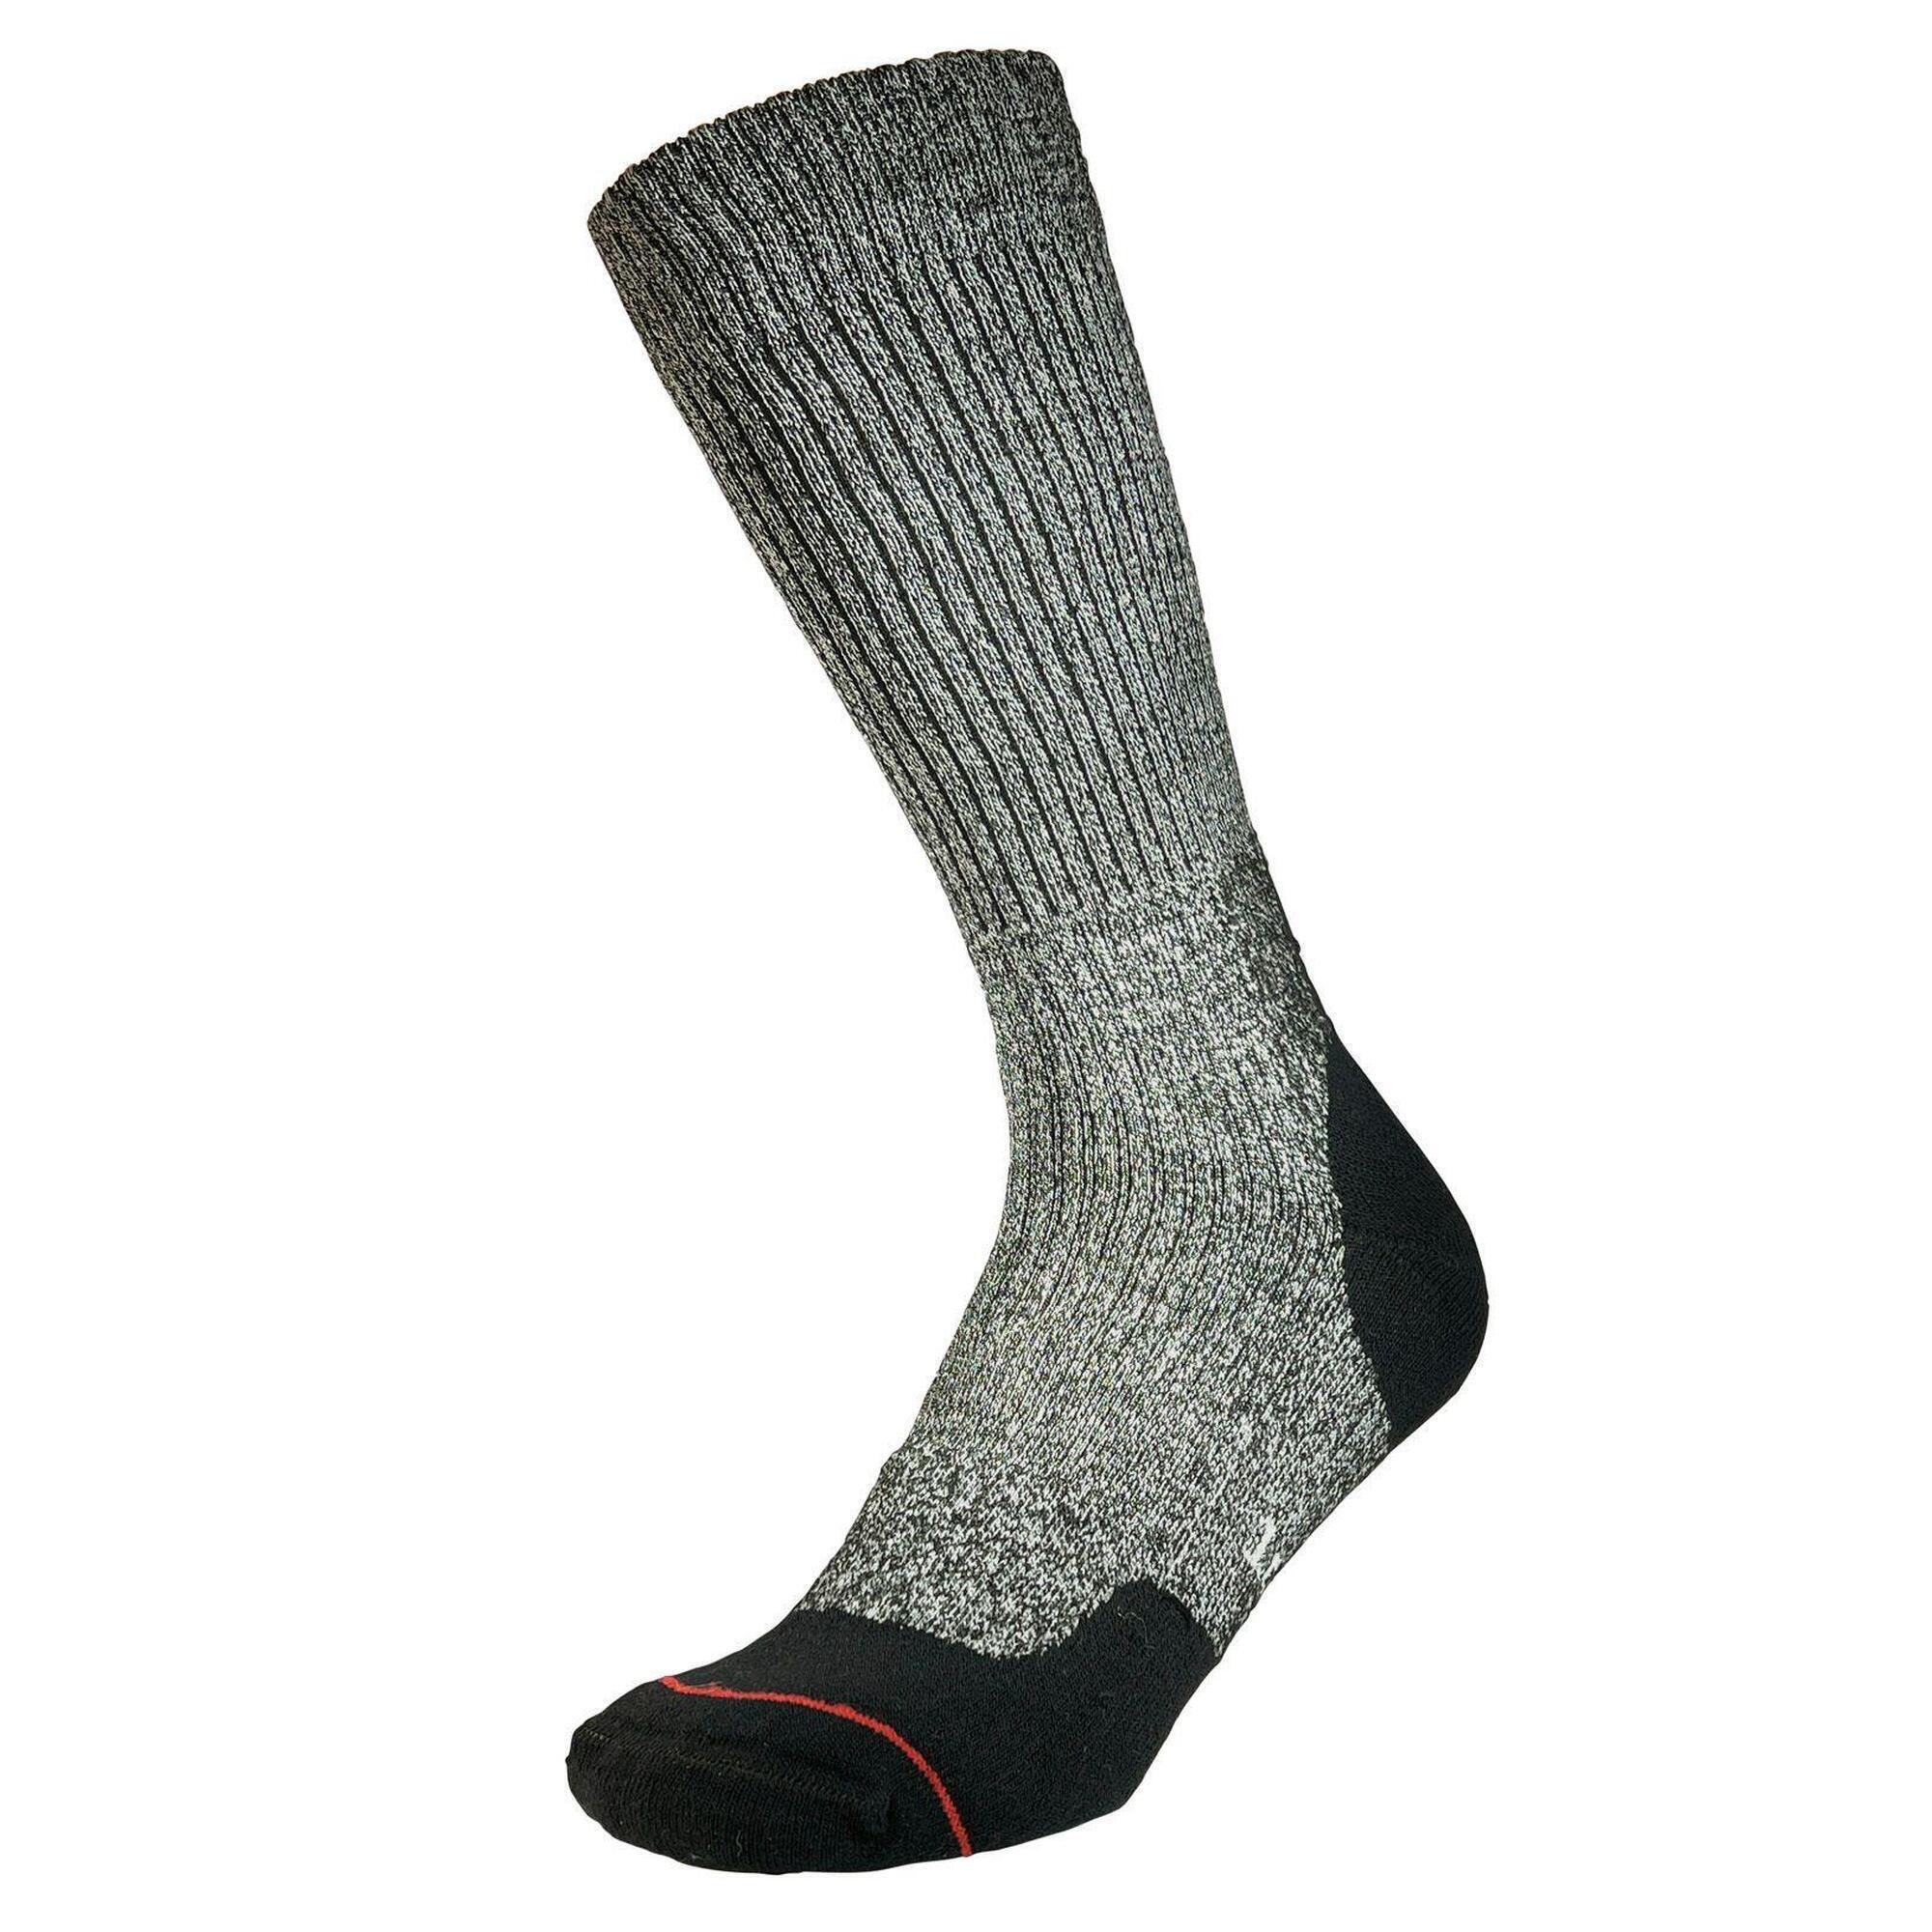 1000 MILE 1000 Mile Fusion Repreve Double Layer Sock Charcoal Marl/Black